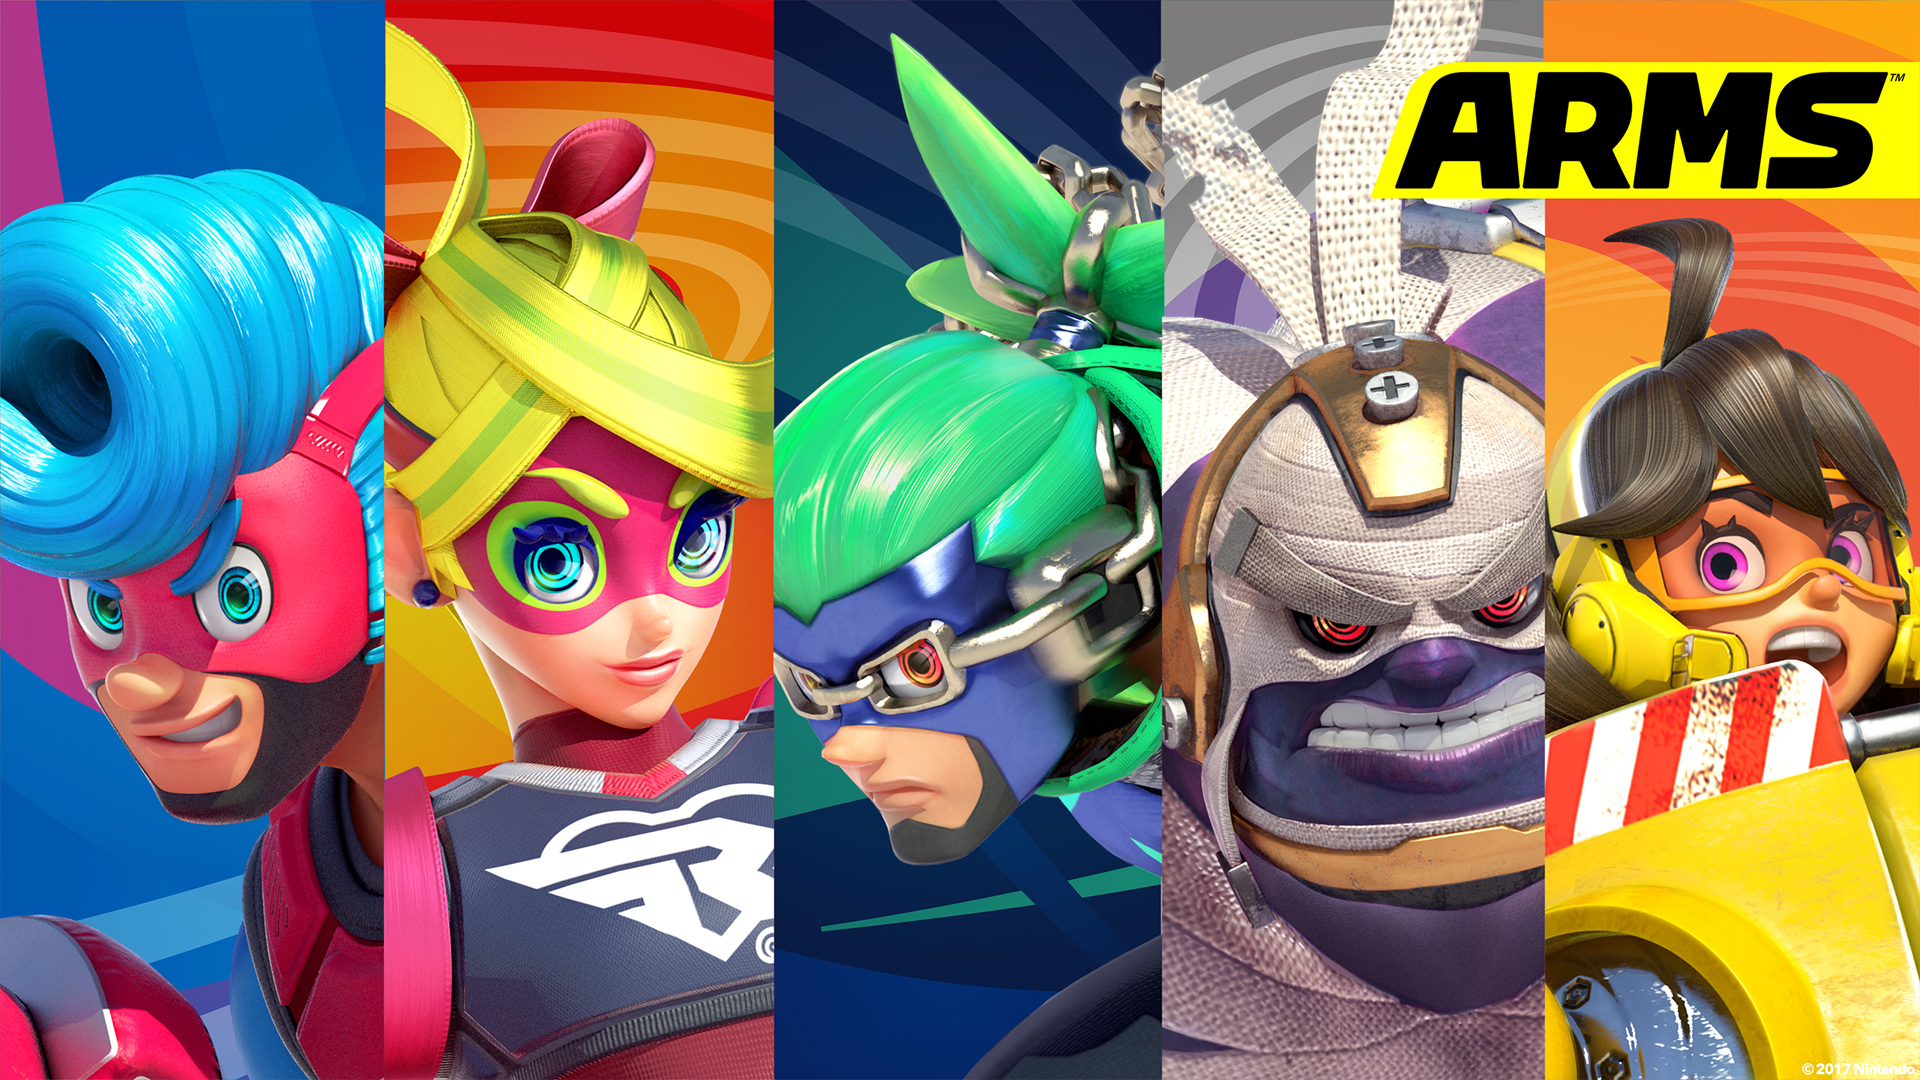 Warriors From Arms Wallpaper Gamepressure